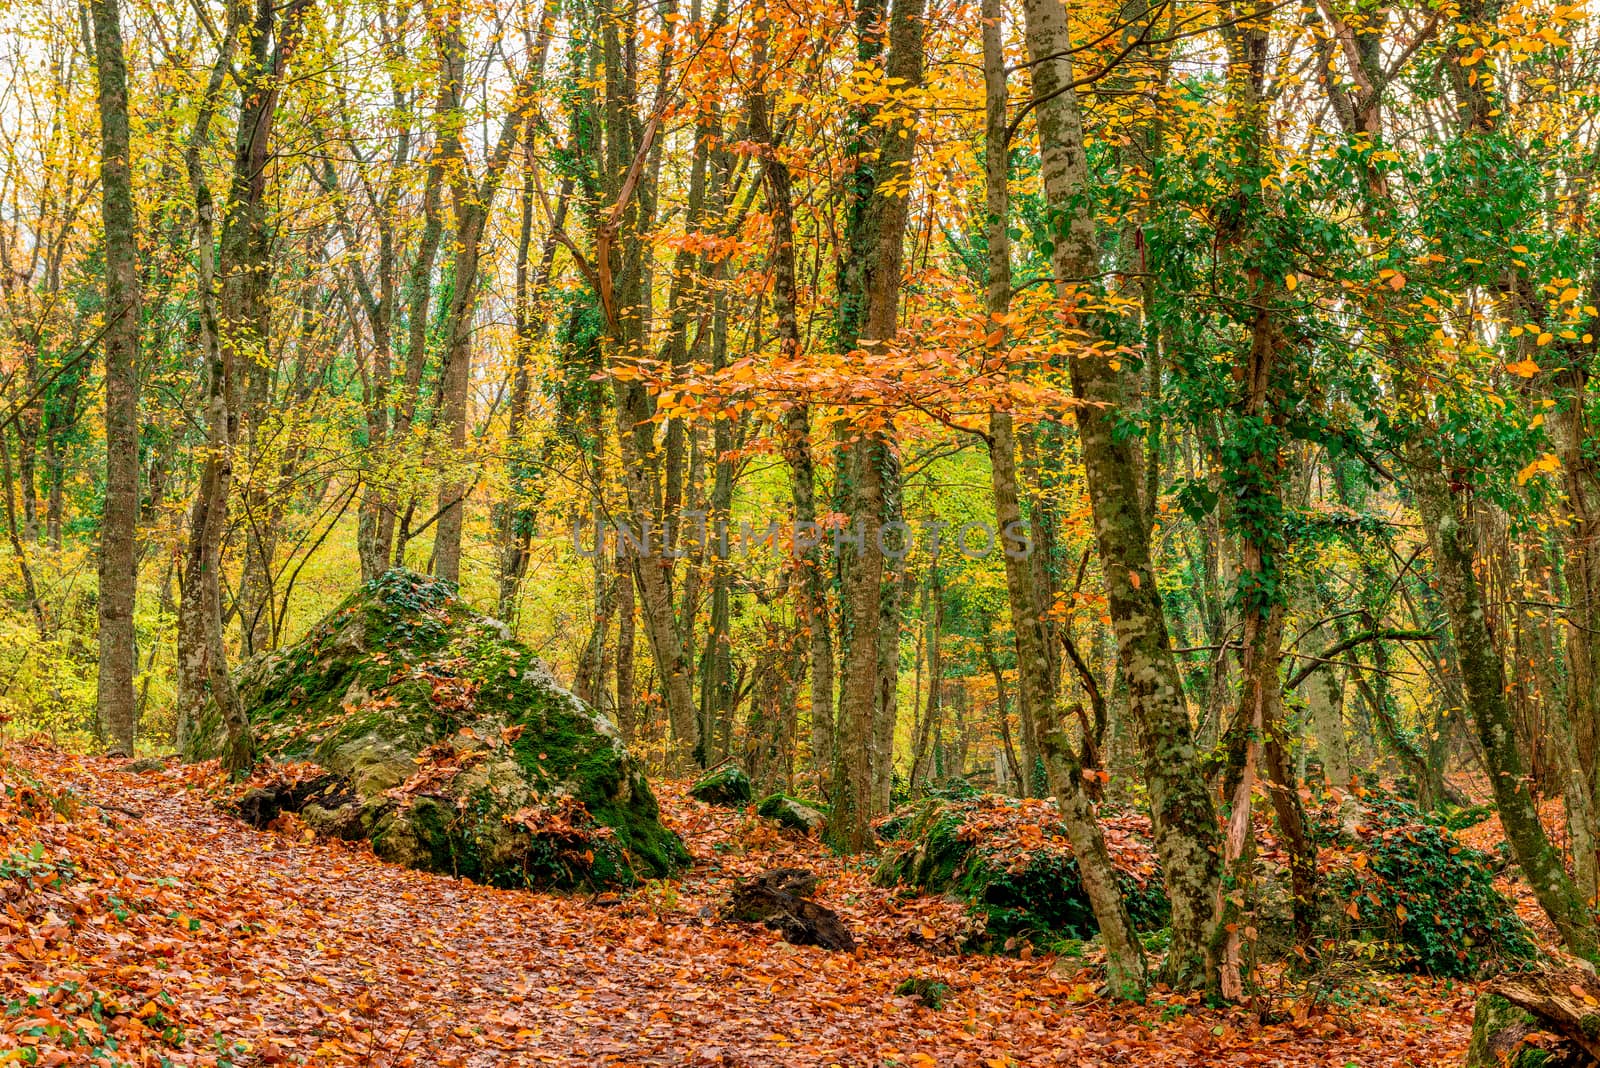 Large stones, fallen leaves - a picturesque autumn forest landscape in the mountains